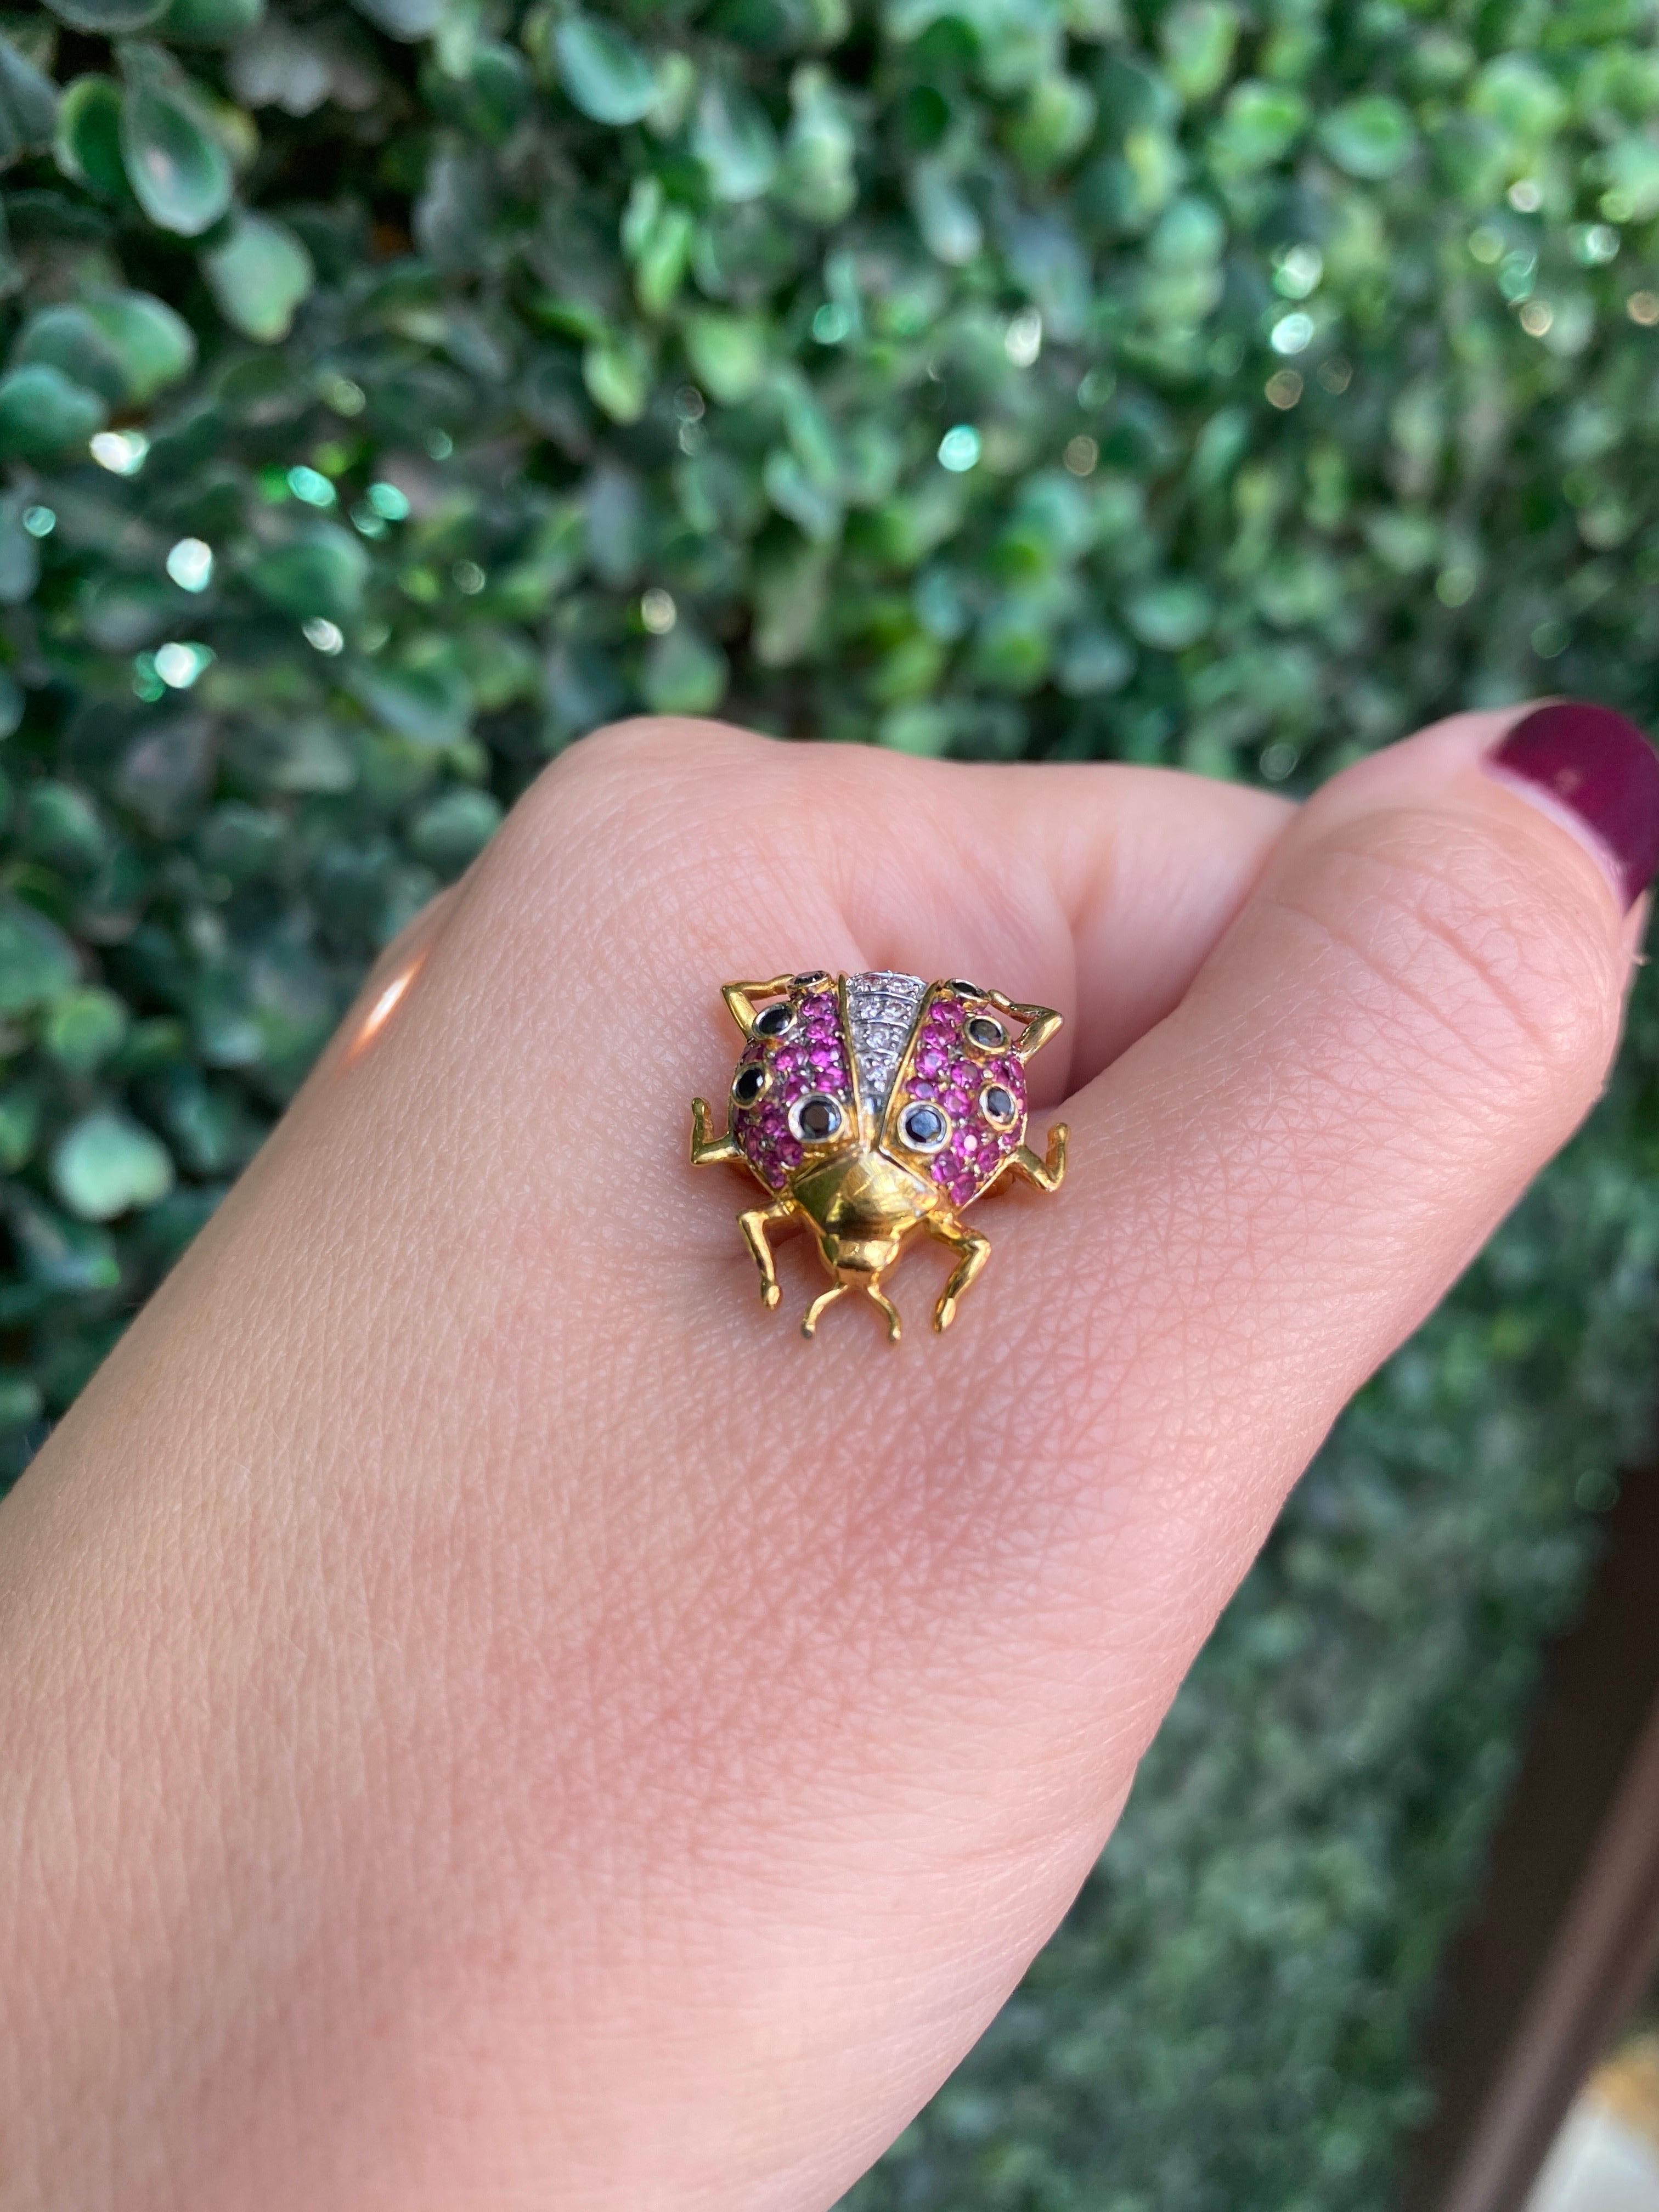 This petite but unique pin features 0.35 carat total weight in round rubies, 0.10 carat total weight in sapphires, and 0.05 carat total weight in round diamonds. Wear alone or gather with the others from our collection for a unique look.